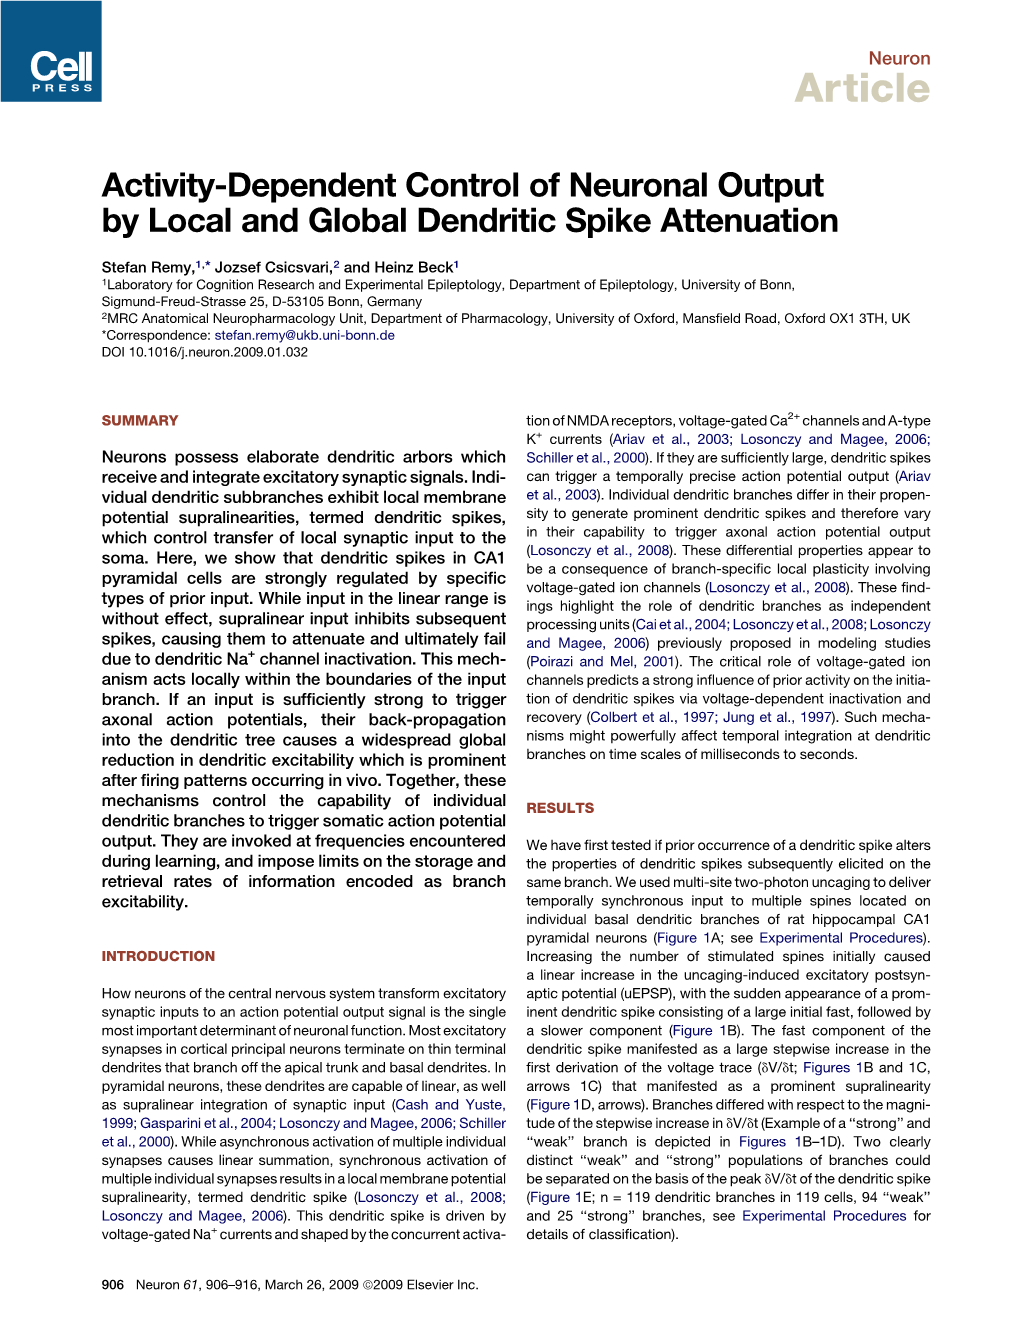 Activity-Dependent Control of Neuronal Output by Local and Global Dendritic Spike Attenuation